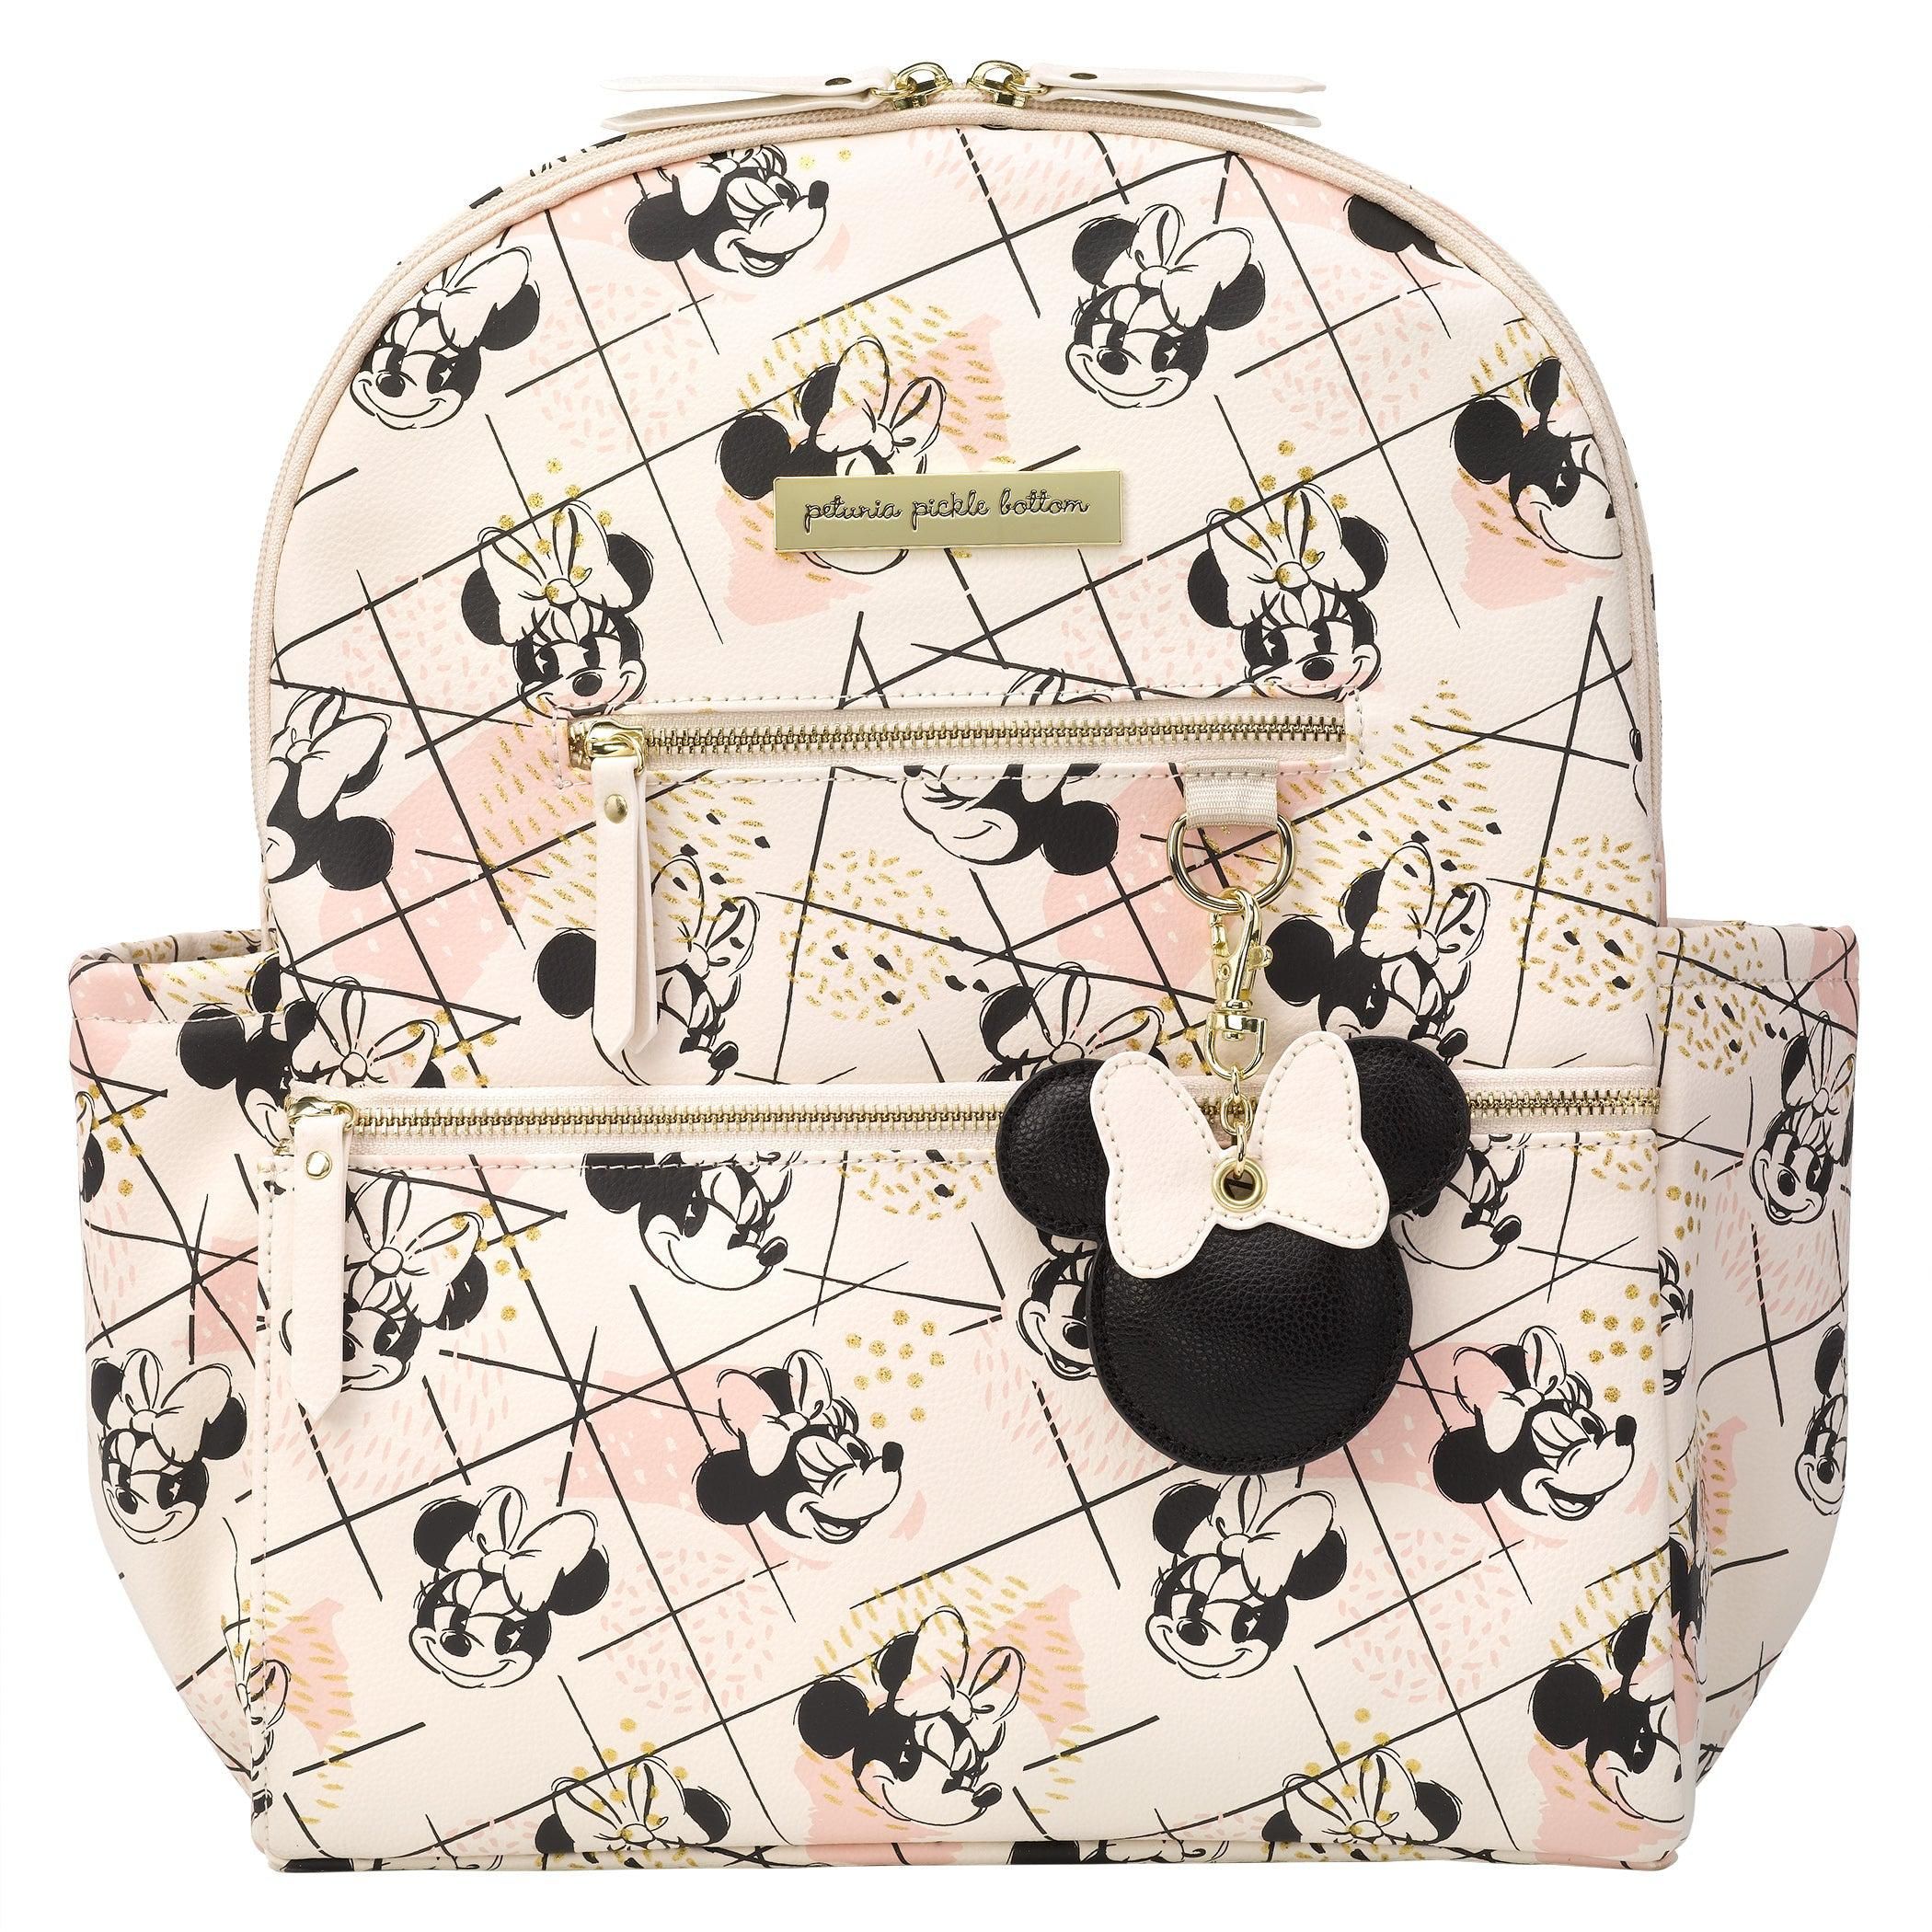 Ace Backpack Diaper Bag in Shimmery Minnie Mouse | Petunia Pickle Bottom